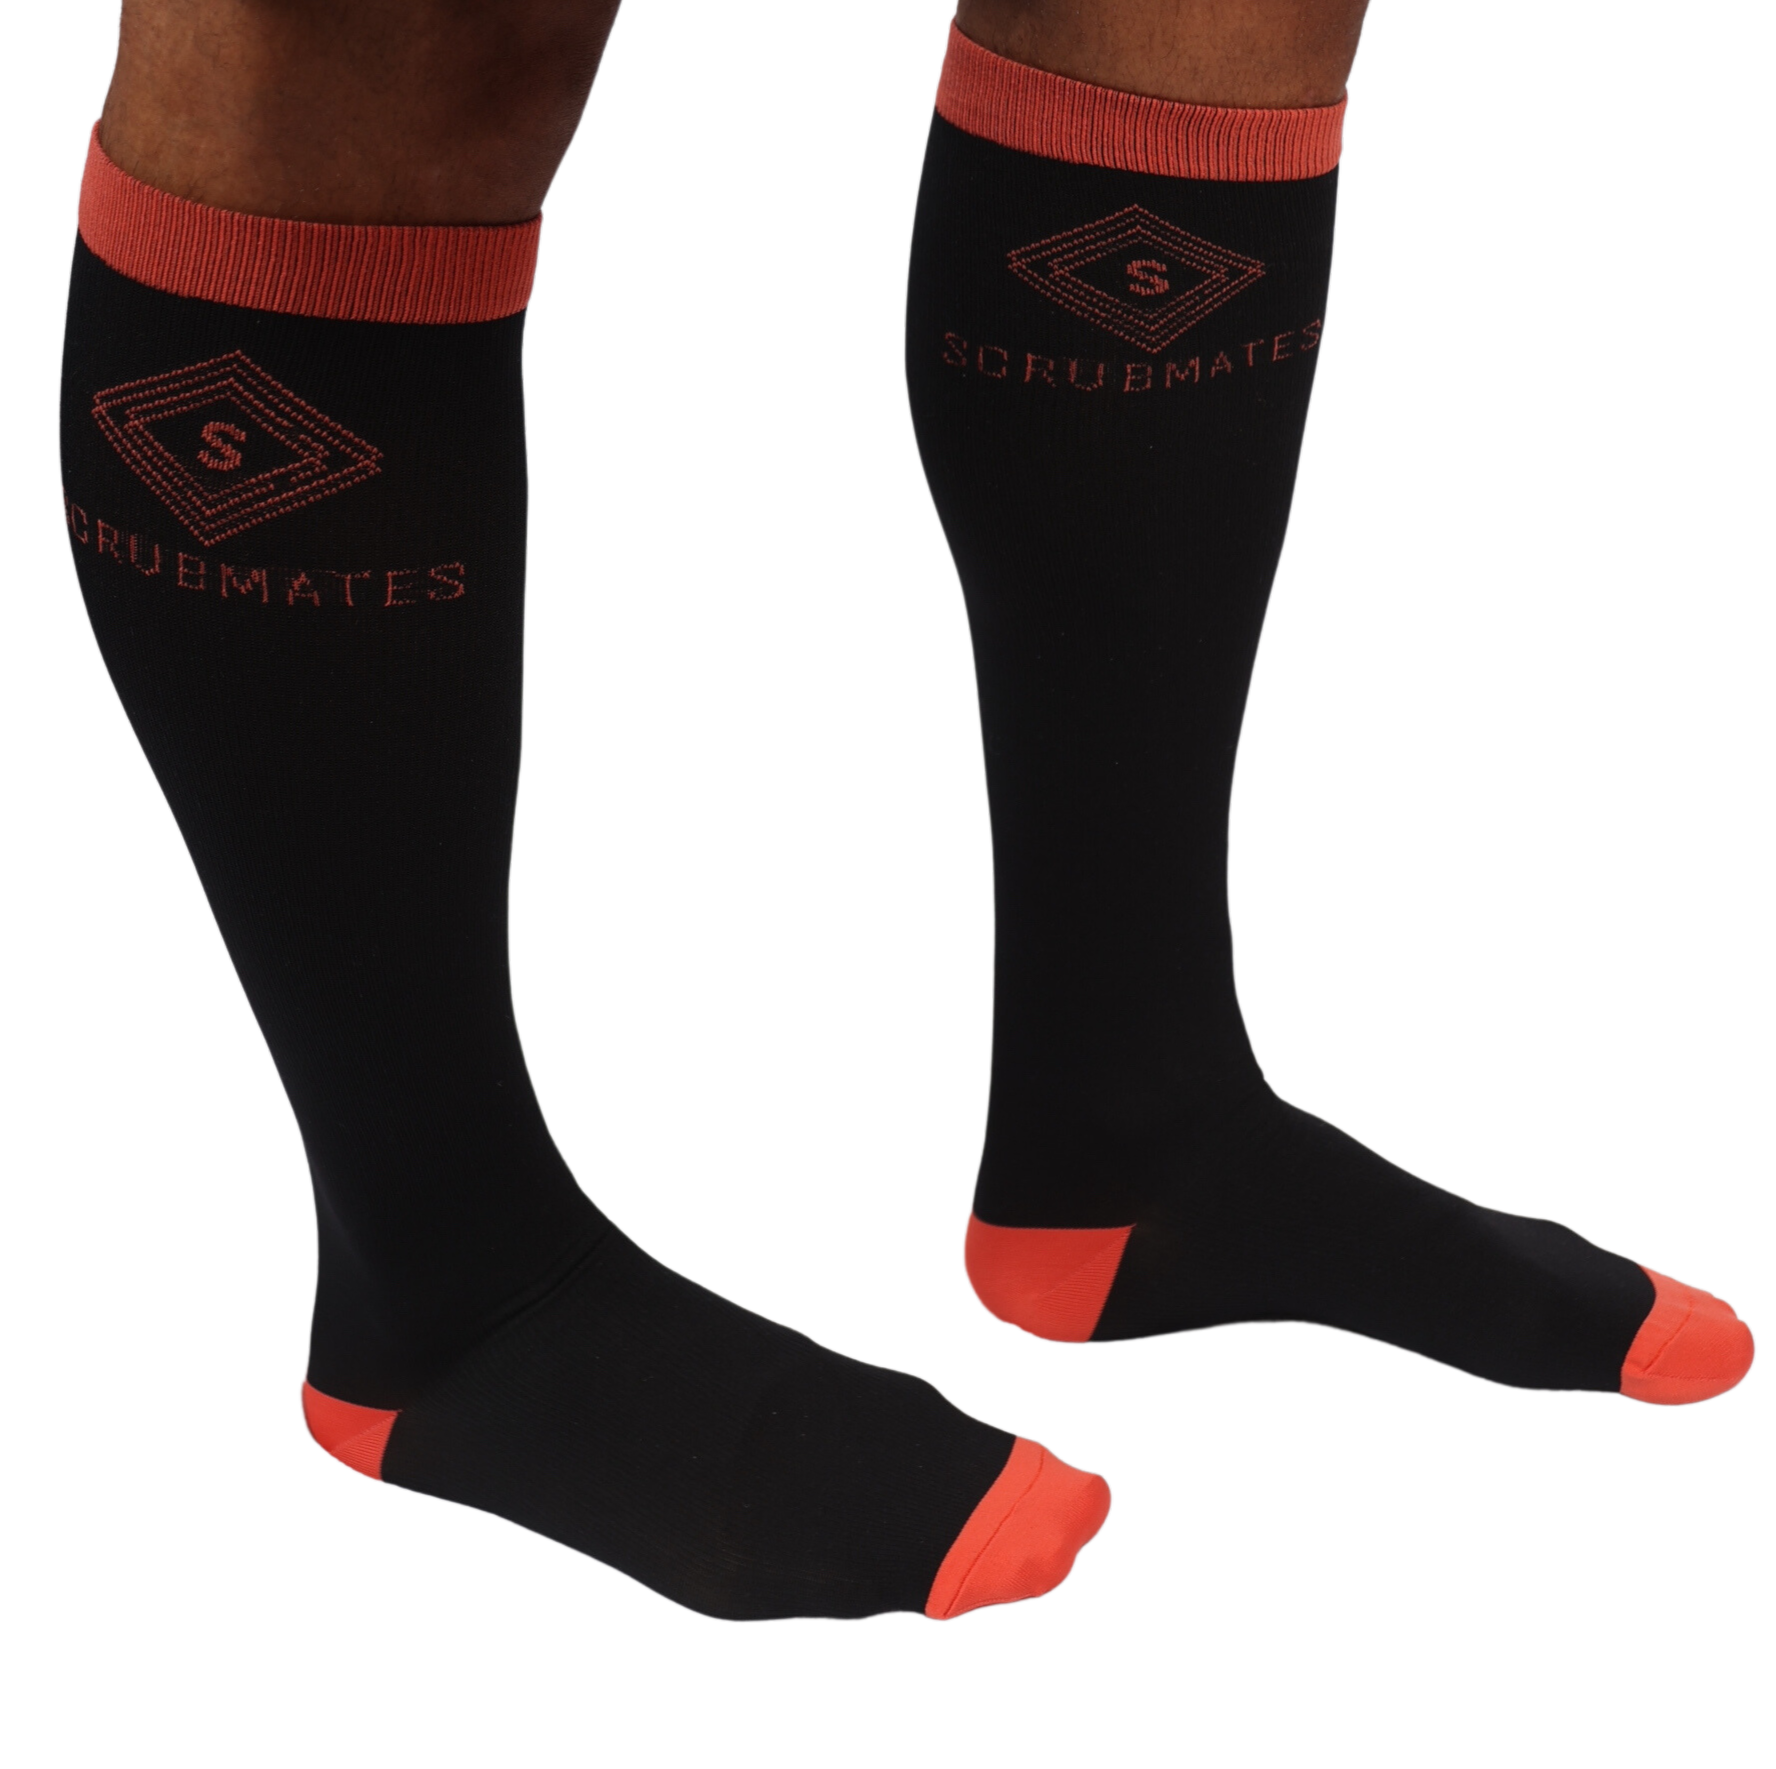 Our compression socks (8-15 mmHg) are highly recommended and preferred by doctors and nurses. They are designed to promote blood circulation and oxygen flow, preventing fatigue and helps with muscle recovery. Whether you are an athlete, teacher, flight crew, receptionist, office worker, healthcare professional, pregnant, or elderly, our socks are universally suitable for all types of work and activities.